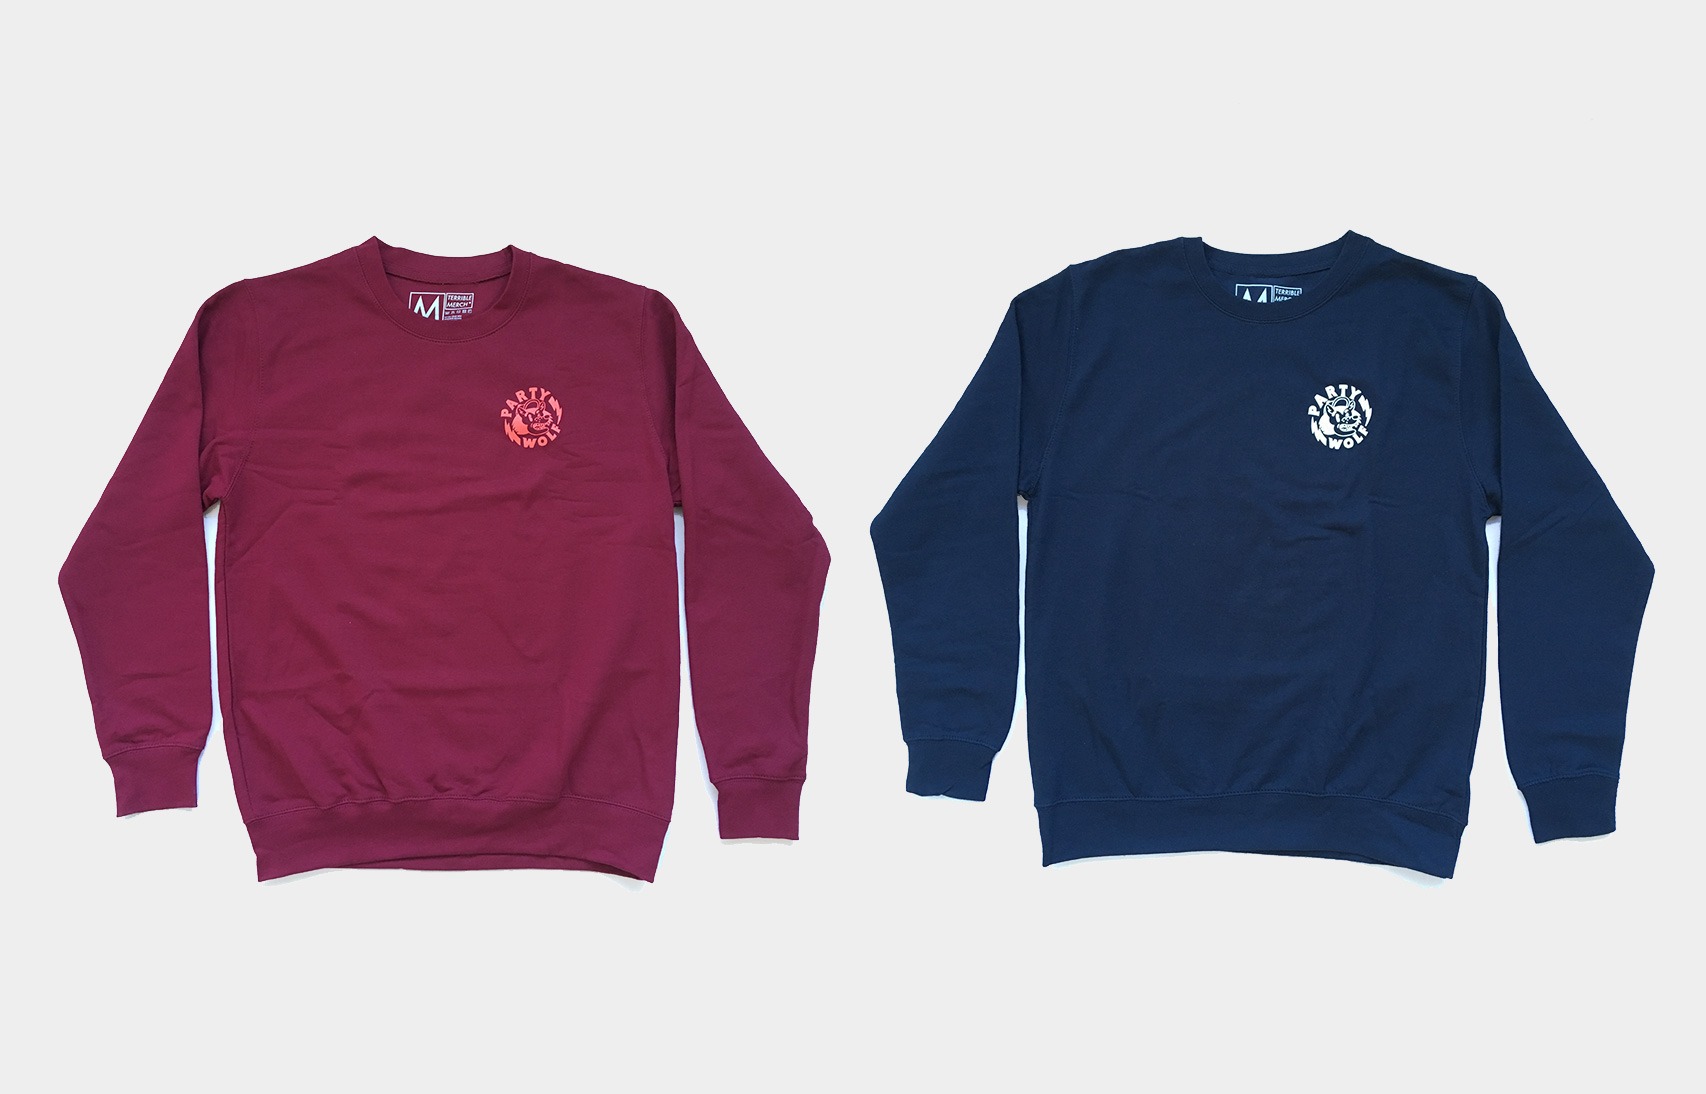 We've made some limited edition sweatshirts - Loud And Quiet